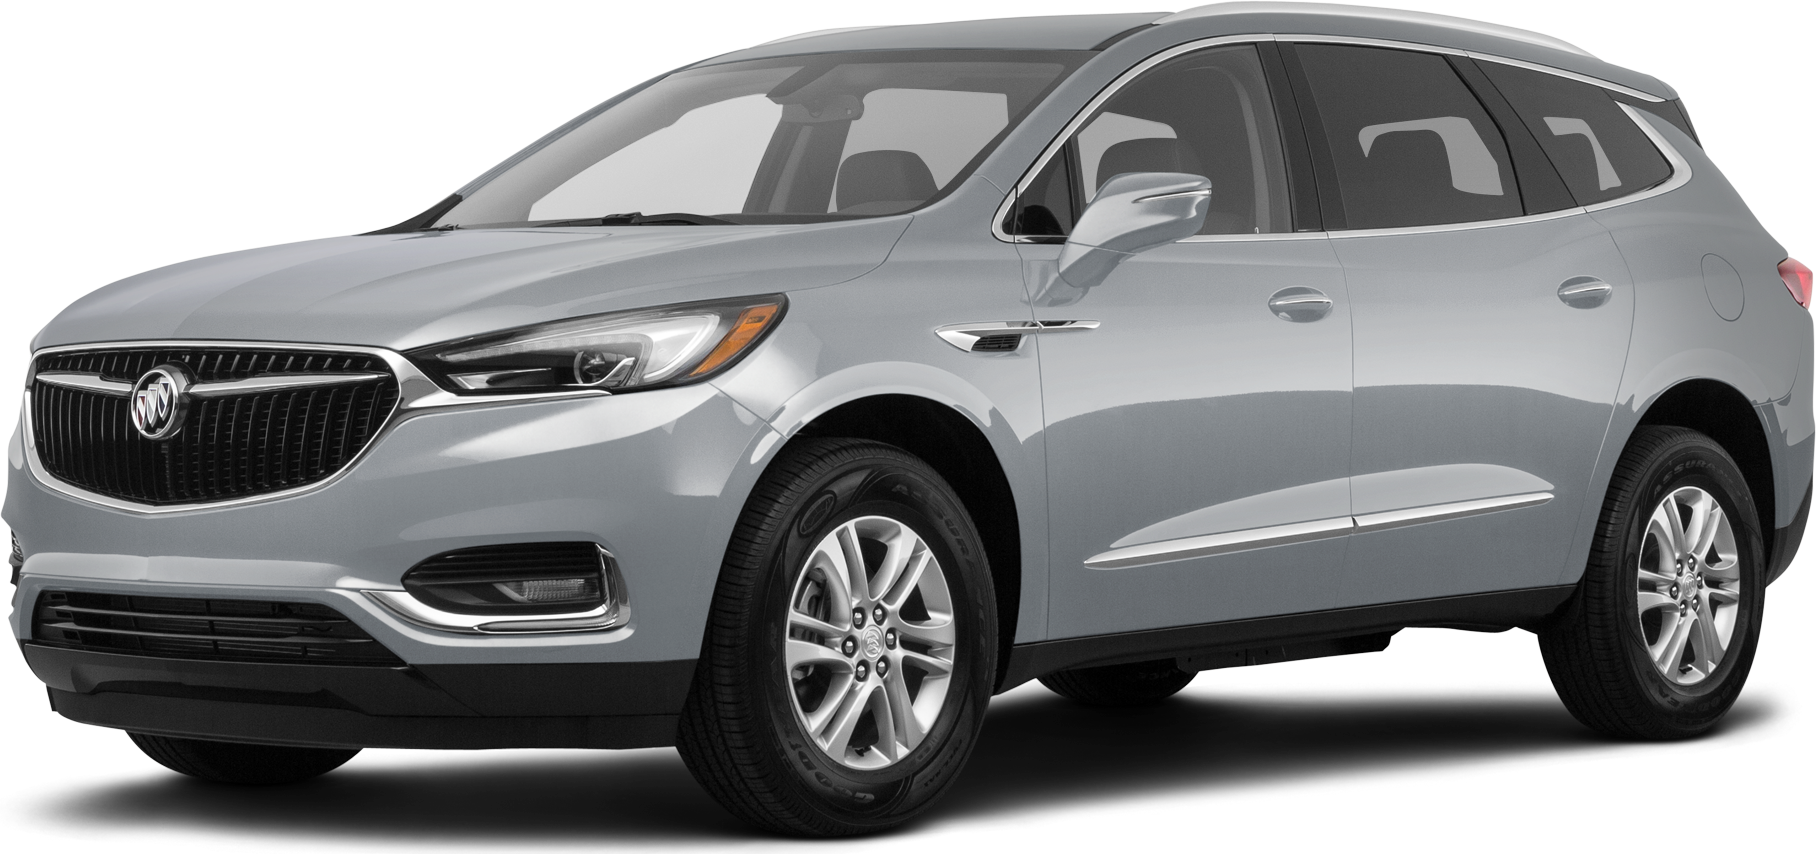 2021 Buick Enclave Price, Value, Ratings & Reviews Kelley Blue Book